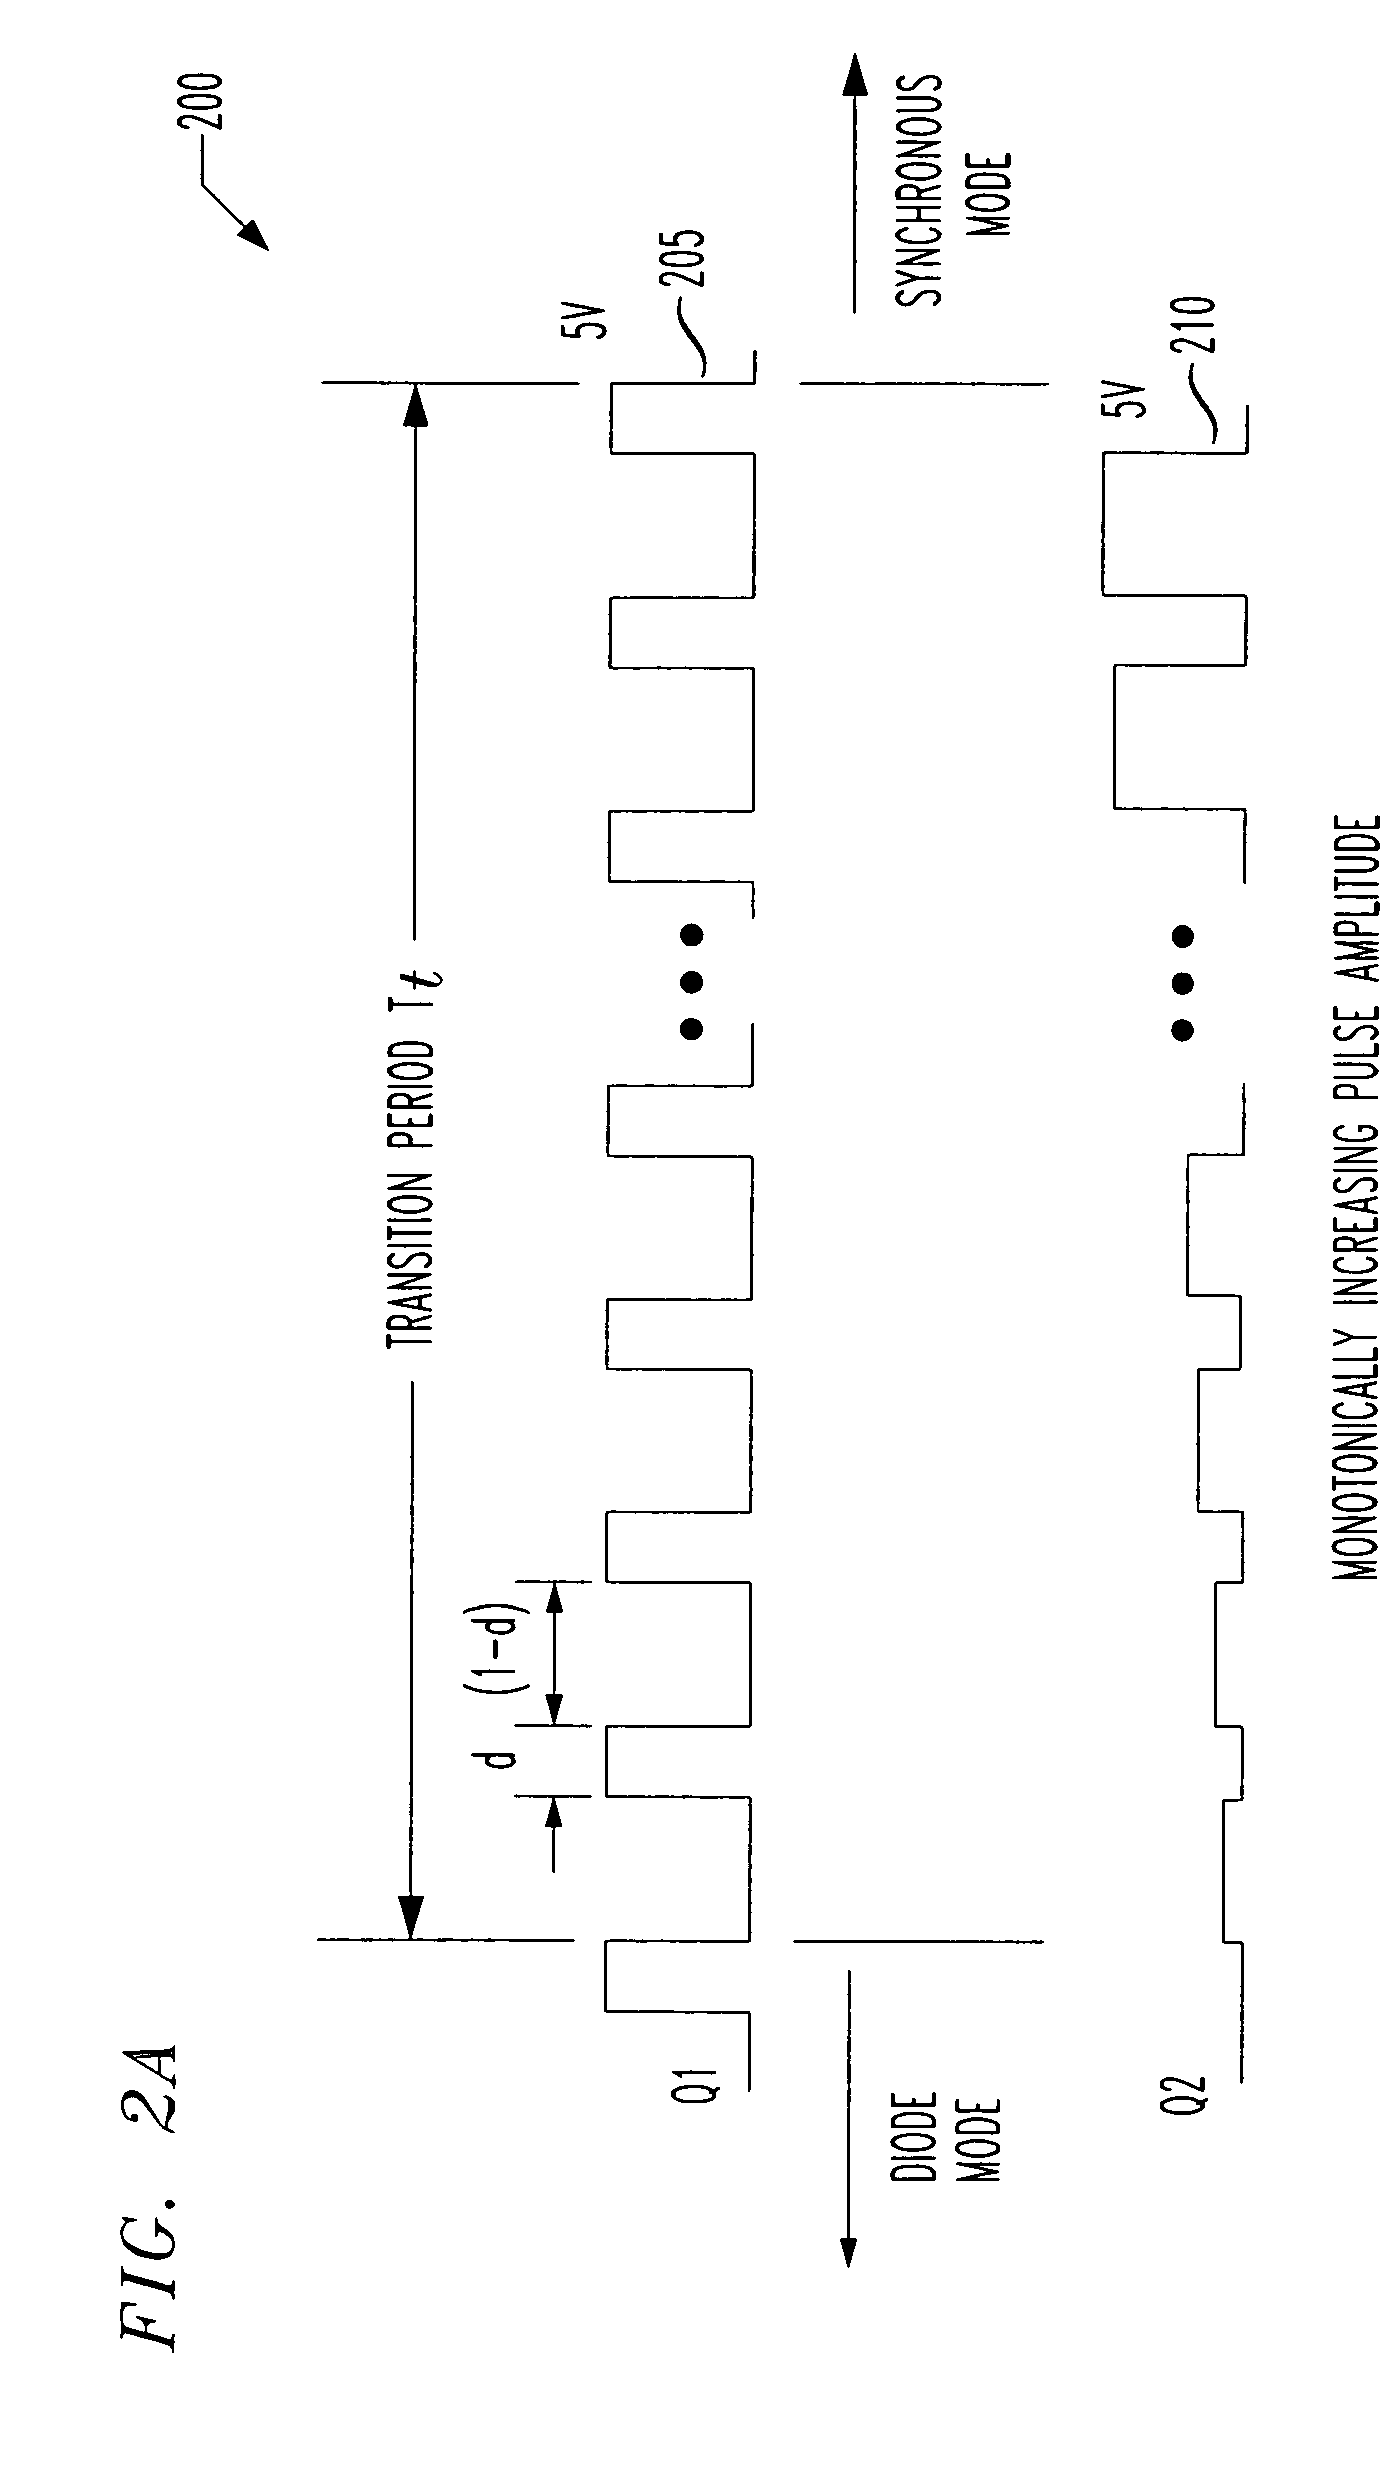 Soft-transition controller of a synchronous converter